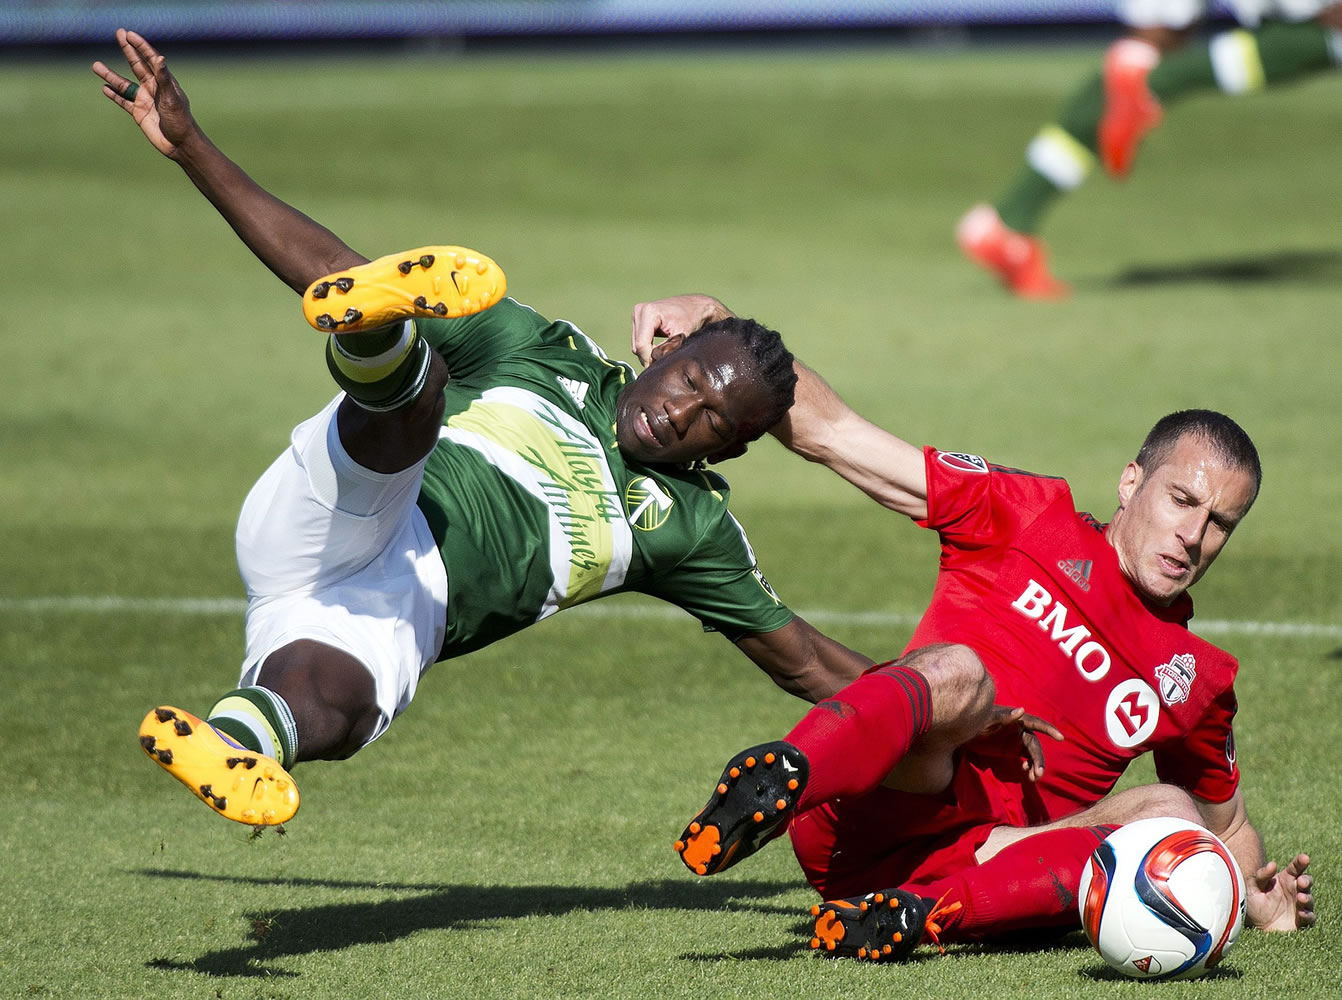 Toronto FC midfielder Benoit Cheyrou, right, battles for the ball against Portland Timbers midfielder Diego Chara during the first half in Toronto on Saturday, May 23, 2015.